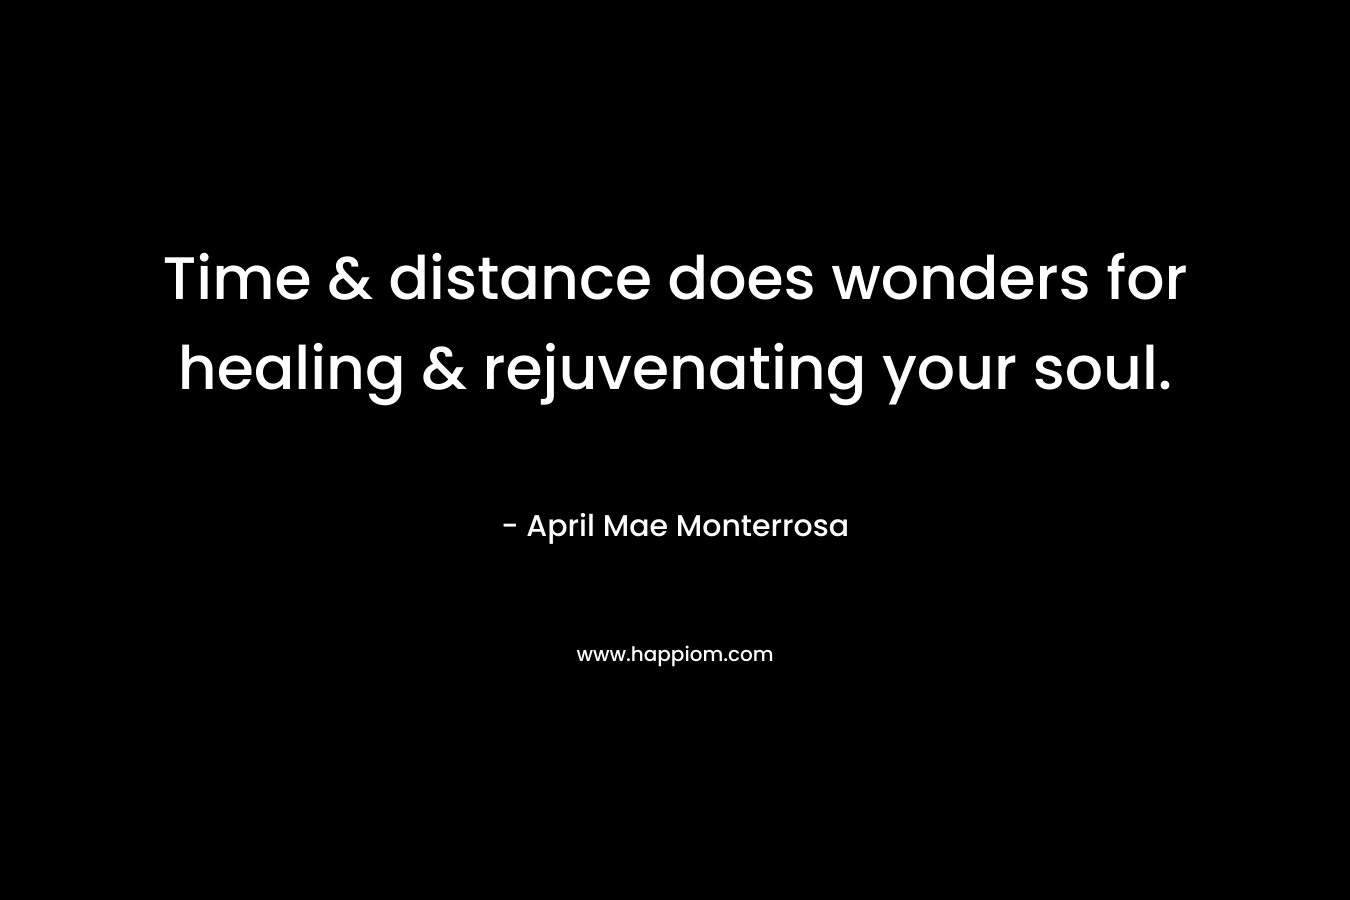 Time & distance does wonders for healing & rejuvenating your soul.